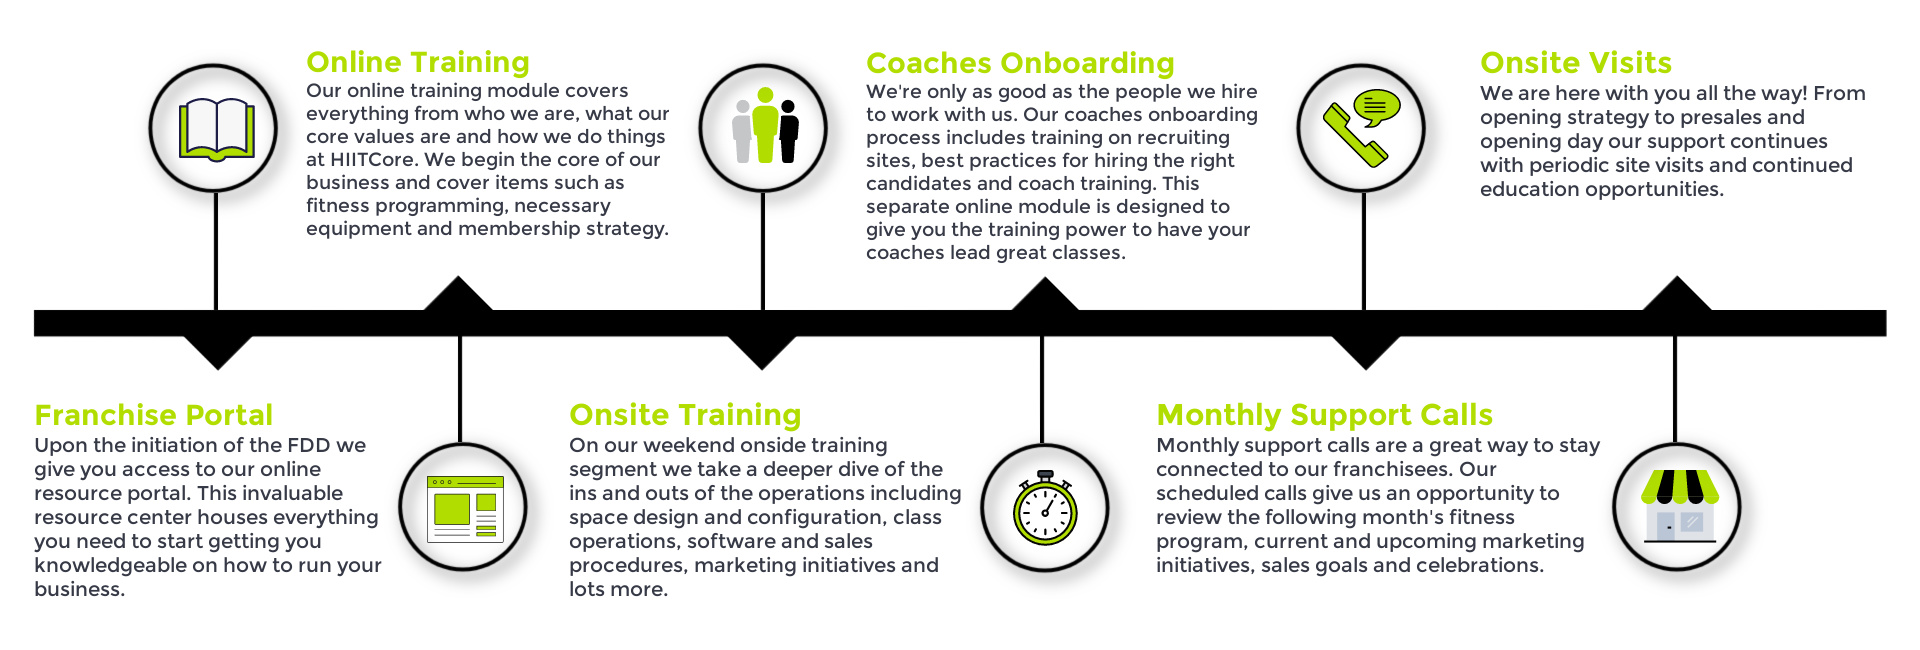 Training and Support matrix outlining different segments of training including access to franchise portal, online training, onsite training, coaches onboarding, monthly support calls, and onsite visits.